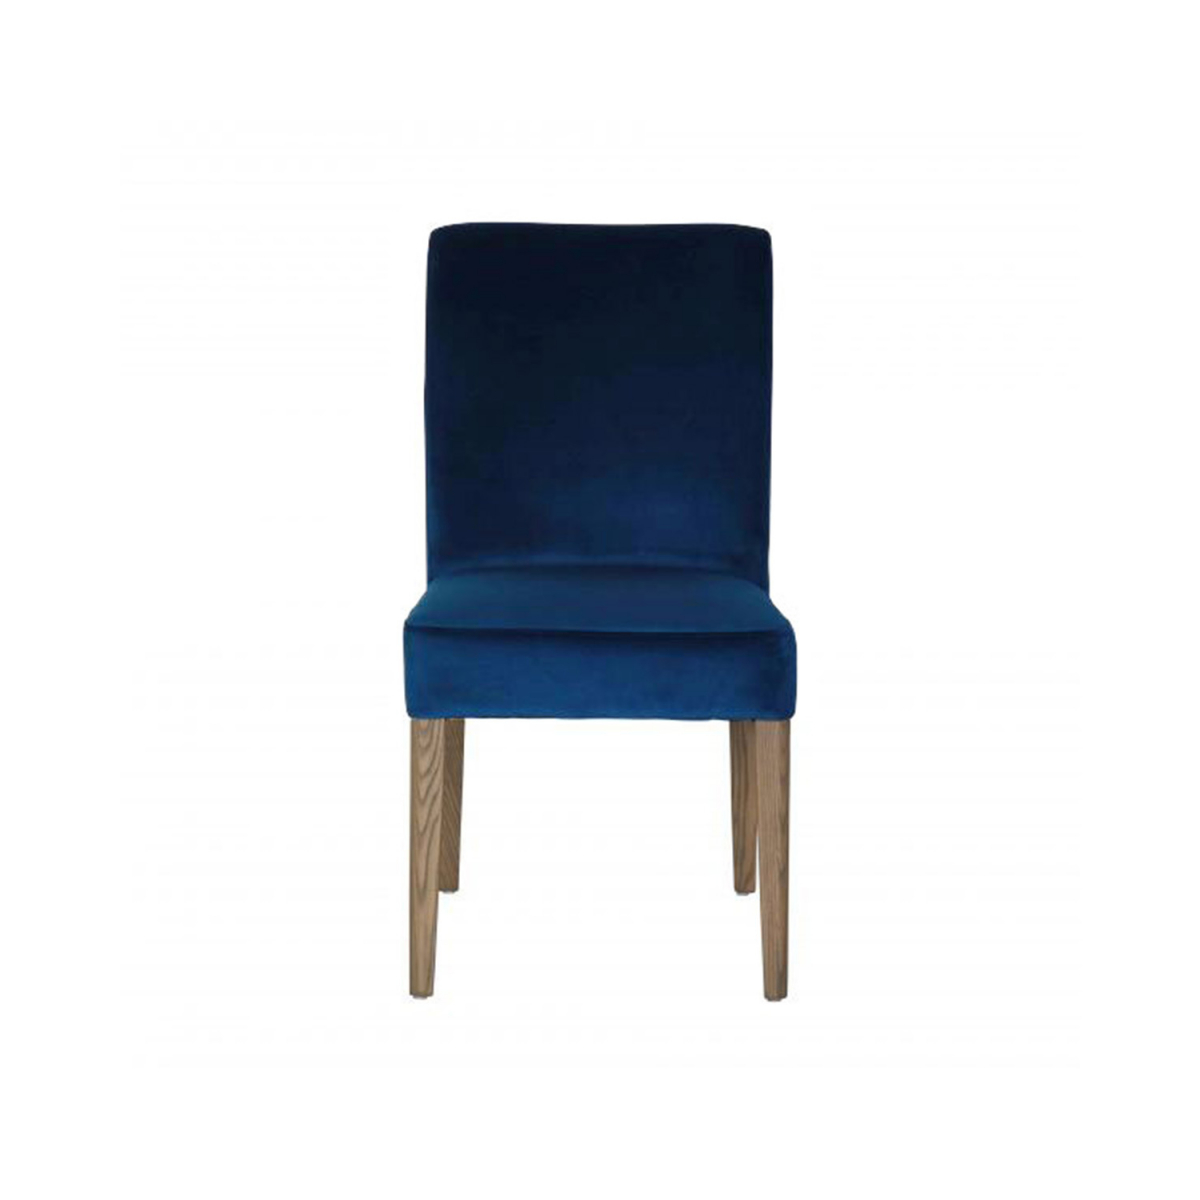 modern upholstered dining chair